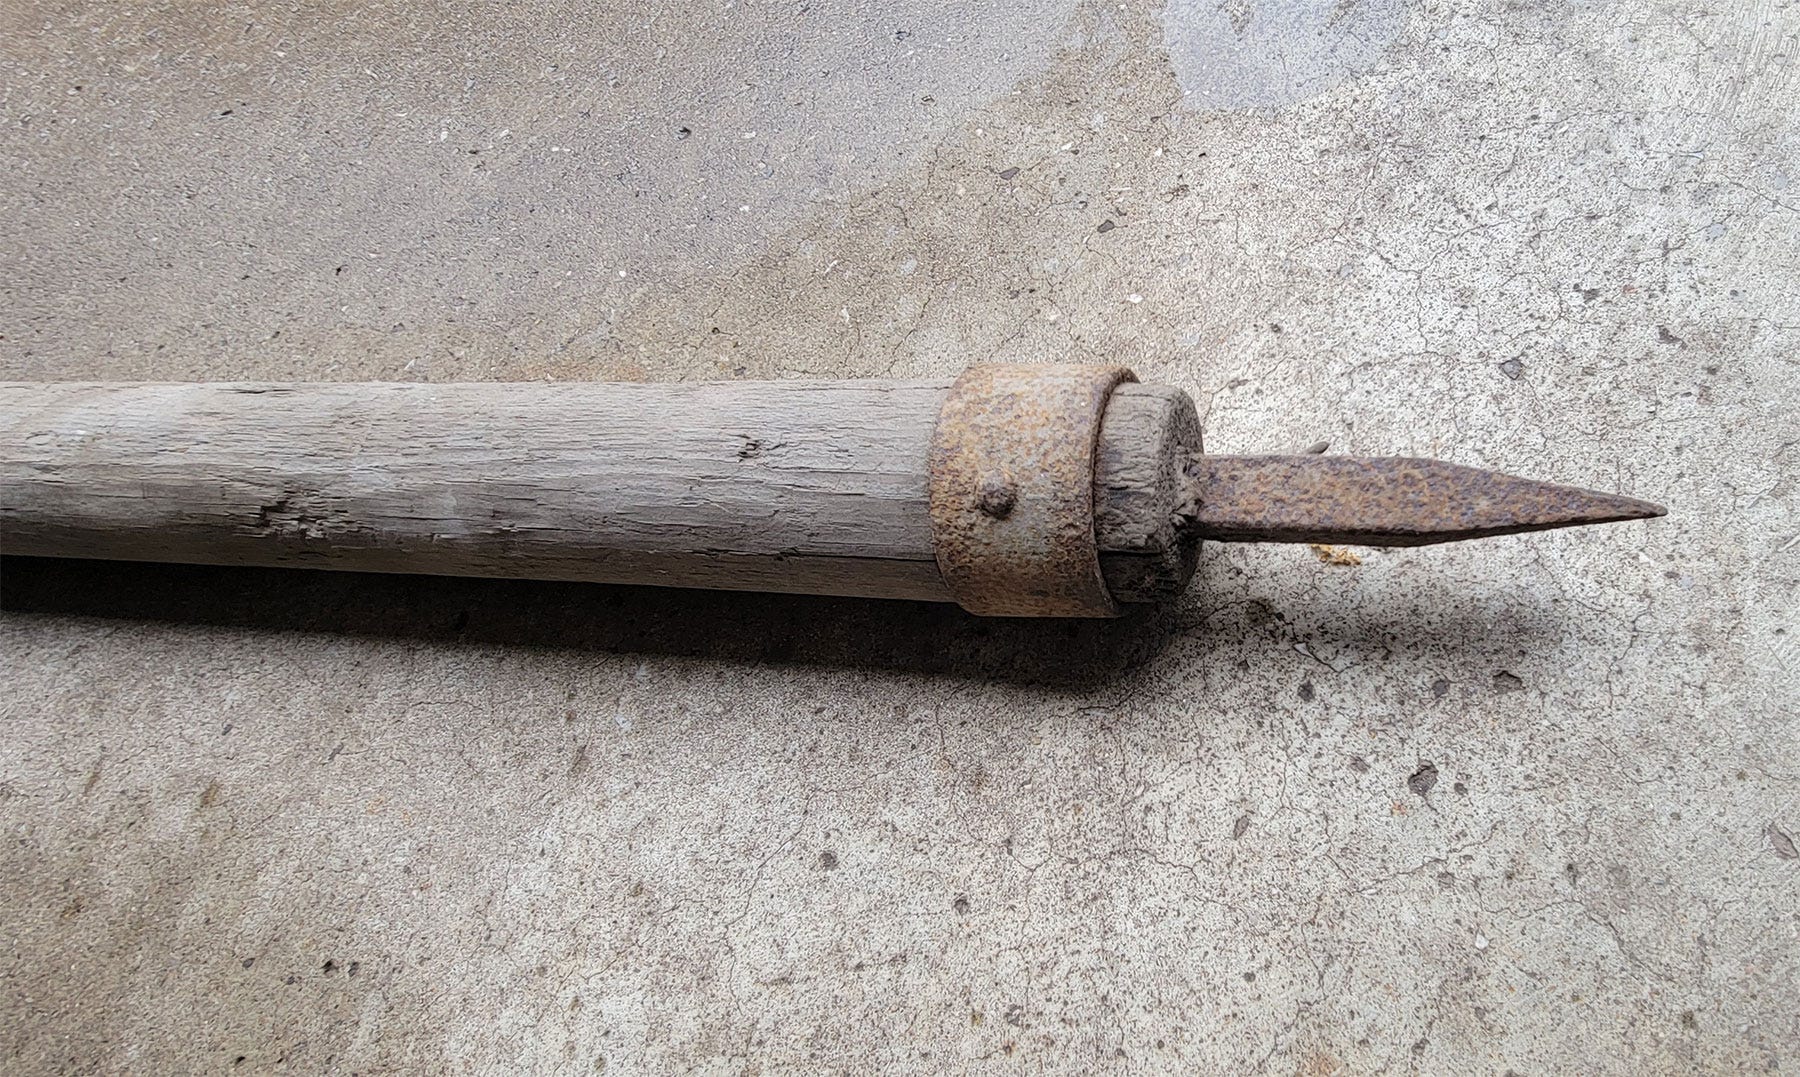 A close-up of an iron arrow attached to a wooden pole